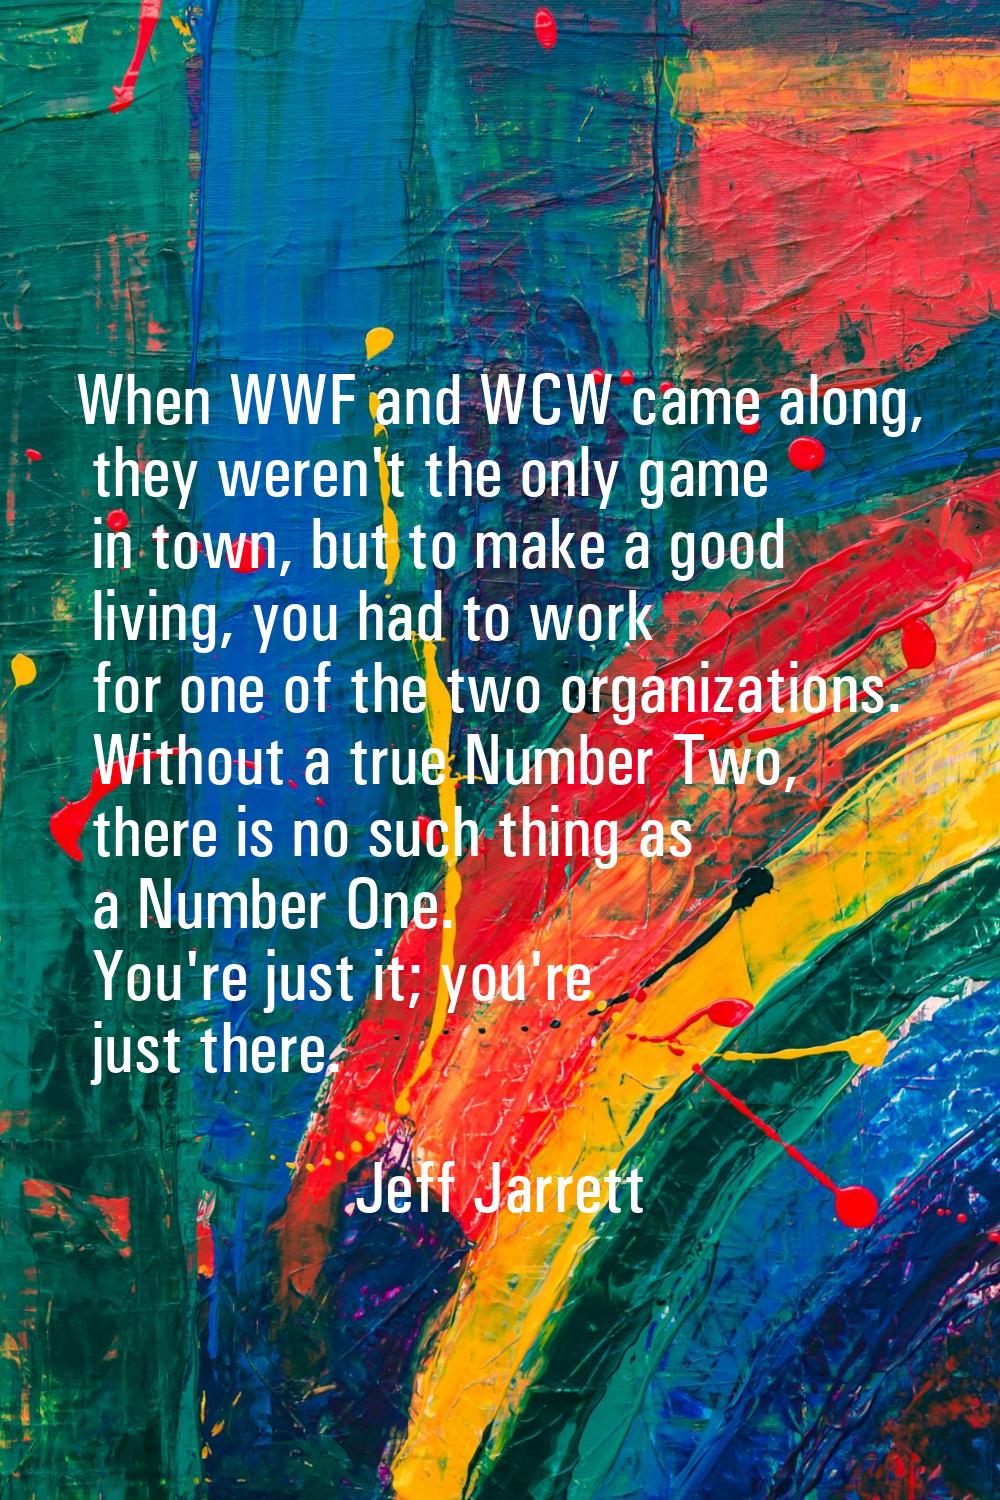 When WWF and WCW came along, they weren't the only game in town, but to make a good living, you had